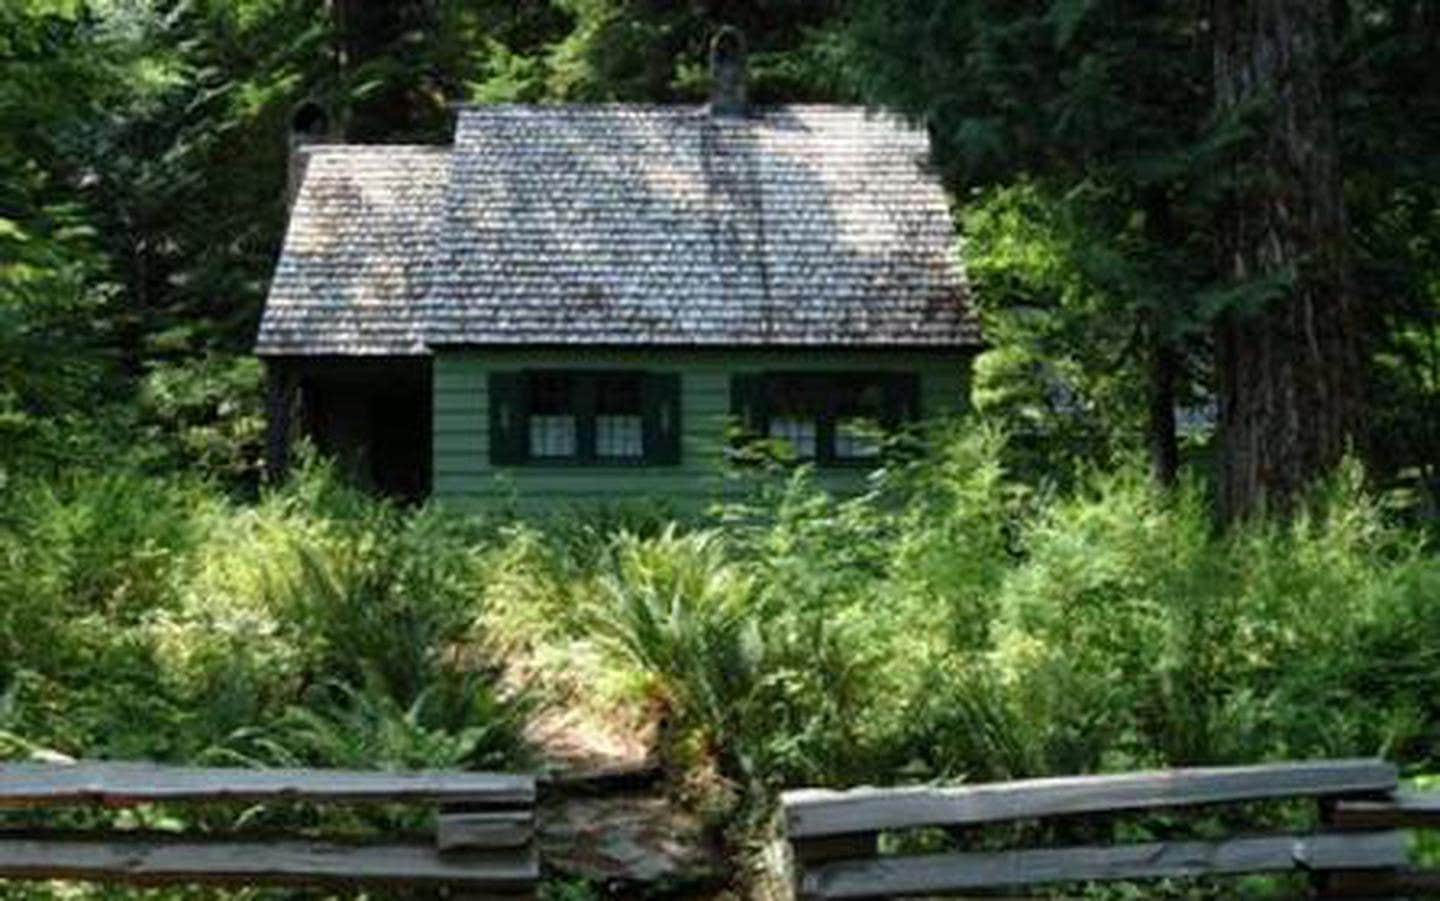 Govt Mineral Springs Guard Sta



Cabin with shake roof and green clapboard siding surrounded by ferns and conifer trees.

Credit: USFS